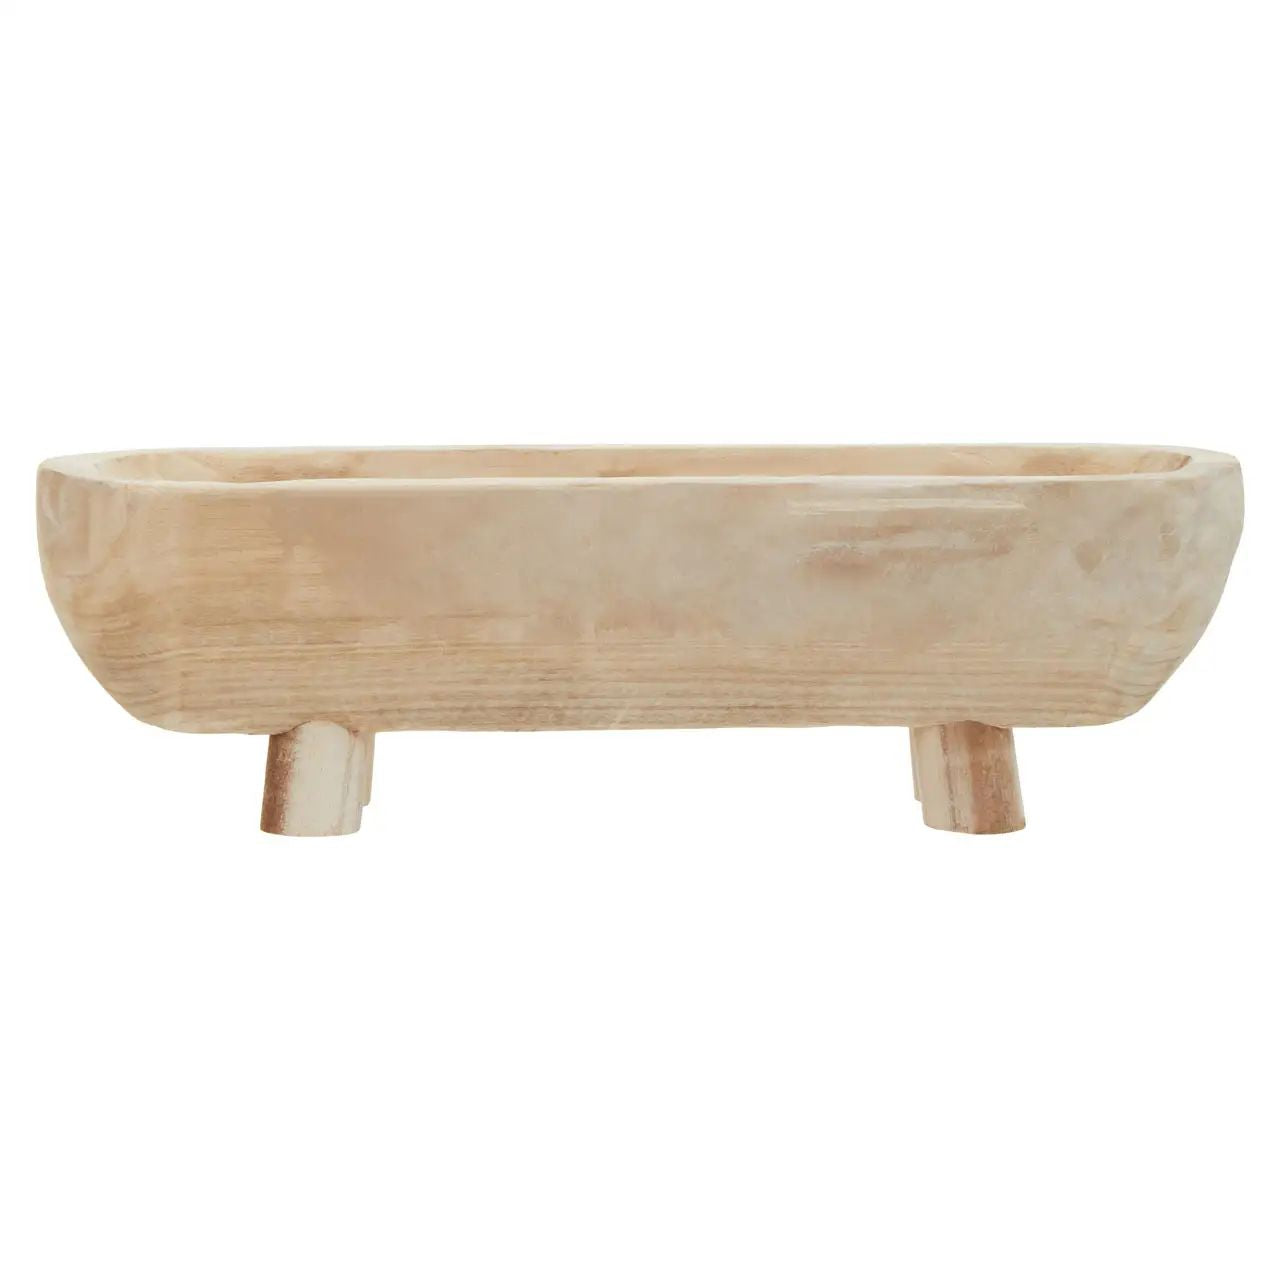 Horal Natural Oval Wooden Dough Bowl